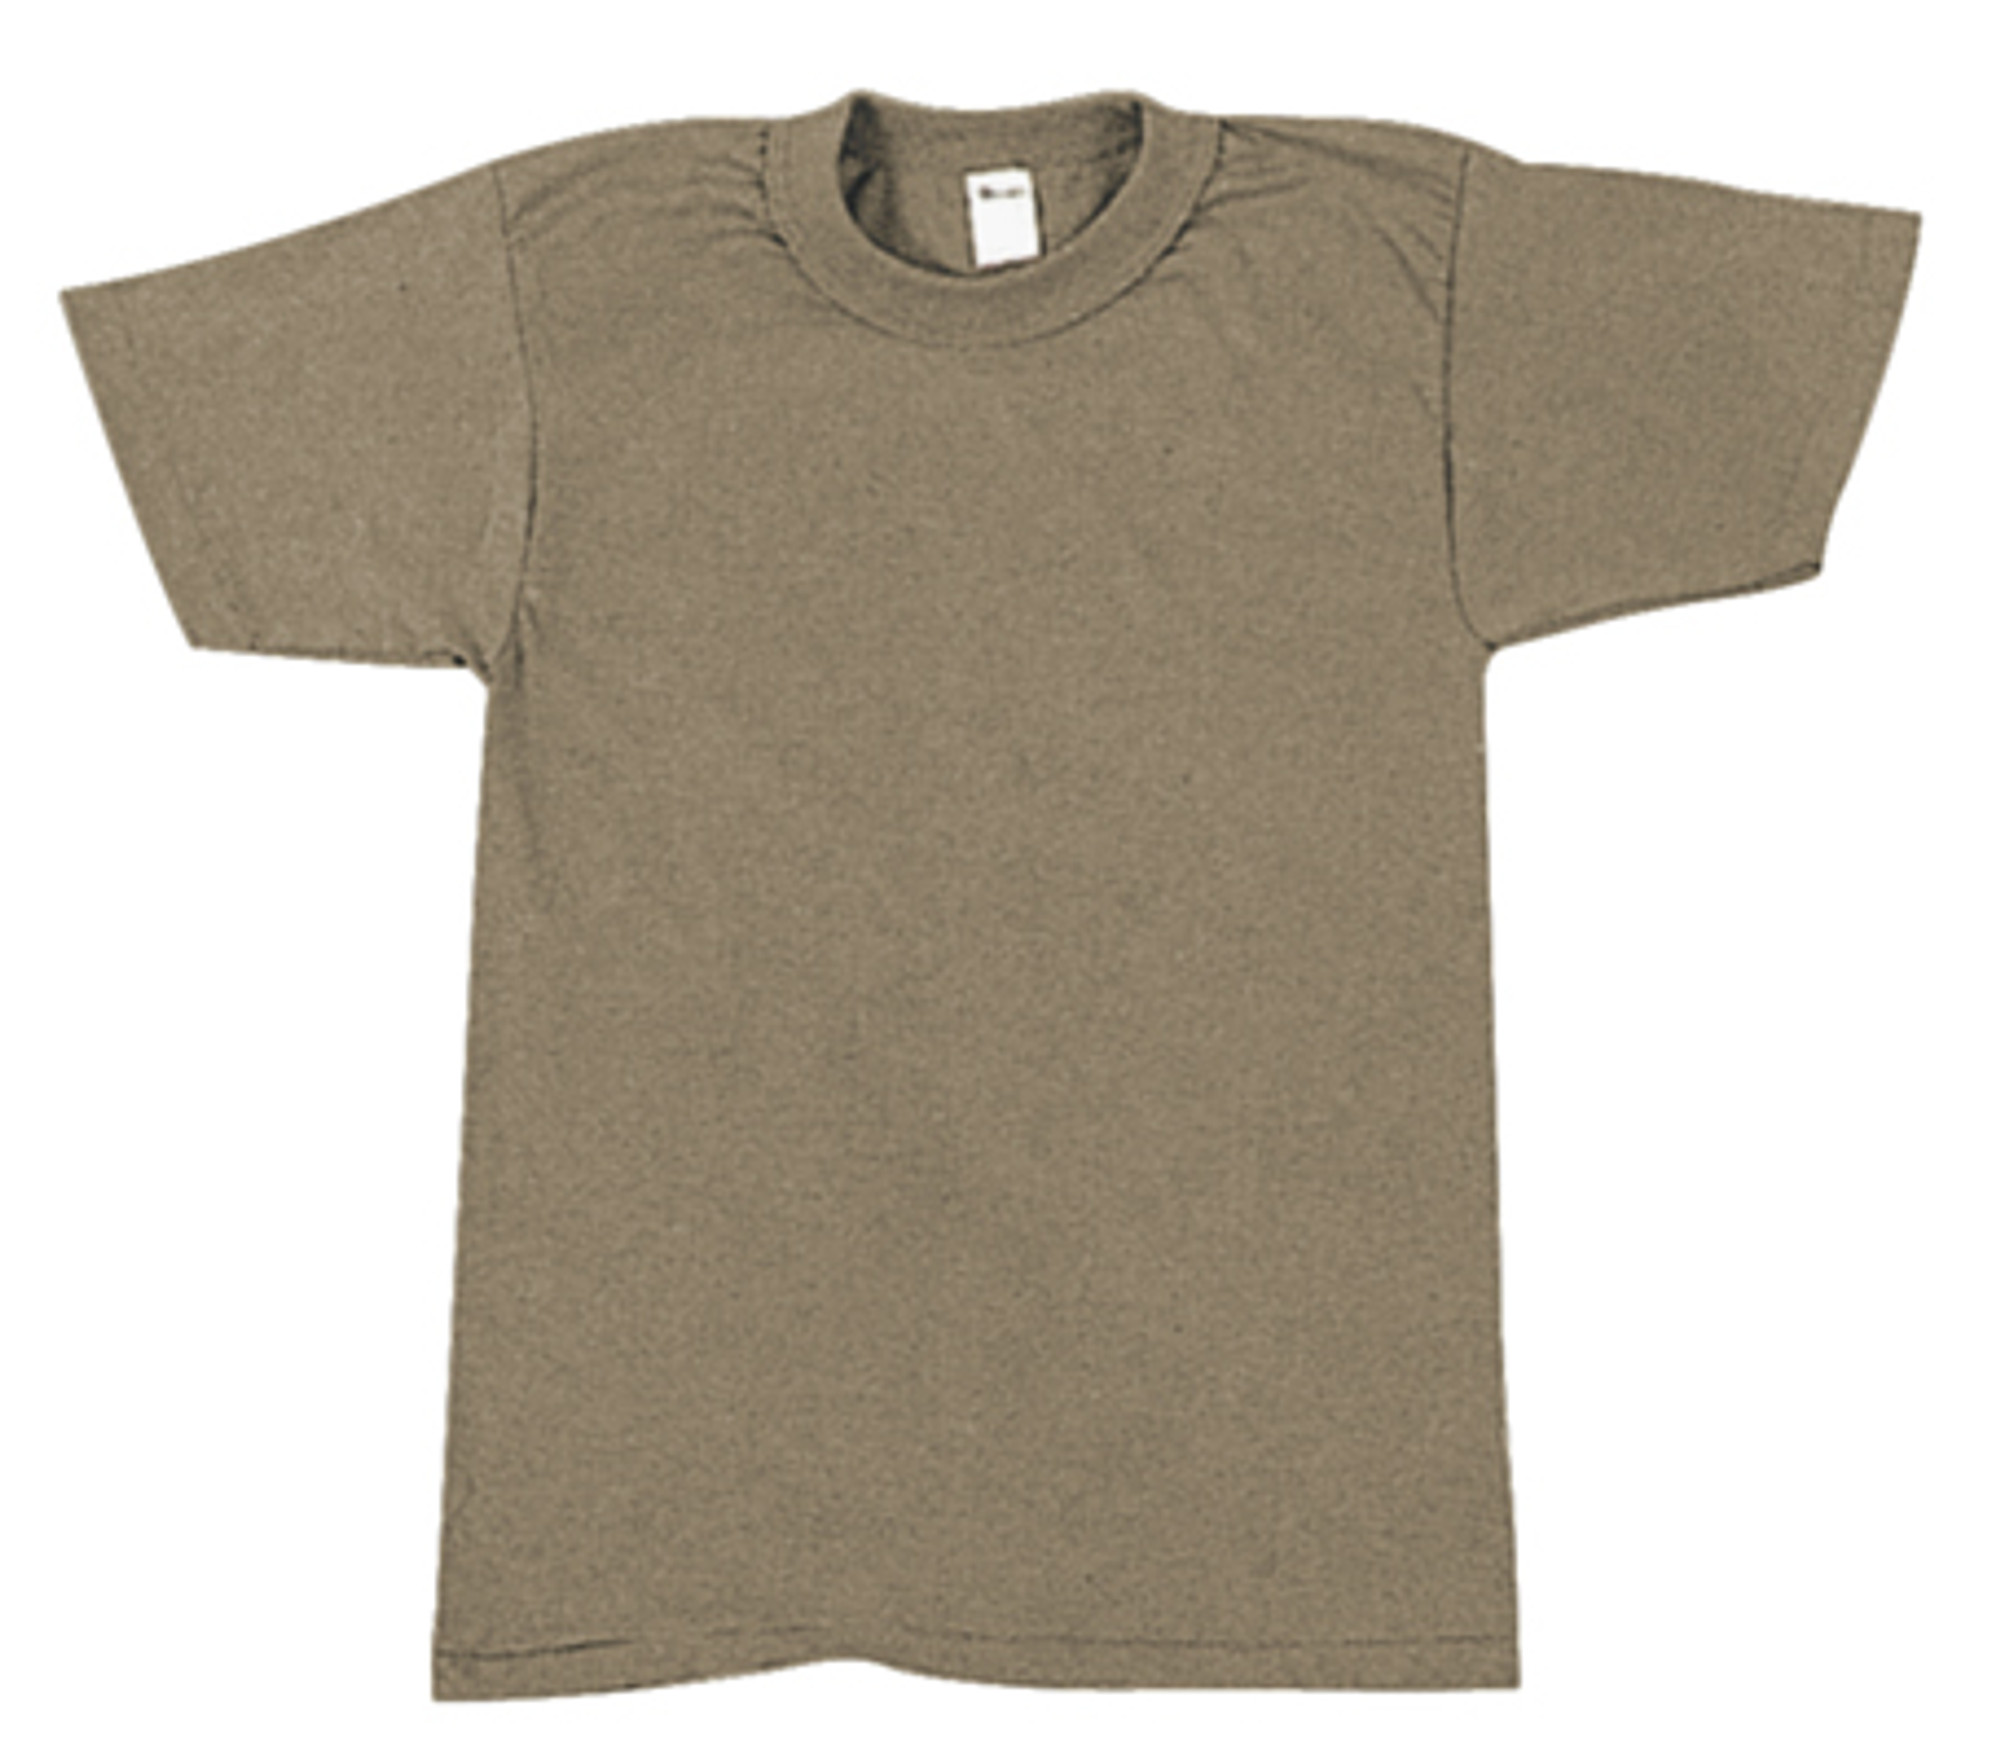 Rothco Solid Color Cotton / Polyester Blend Military T-Shirt - Brown